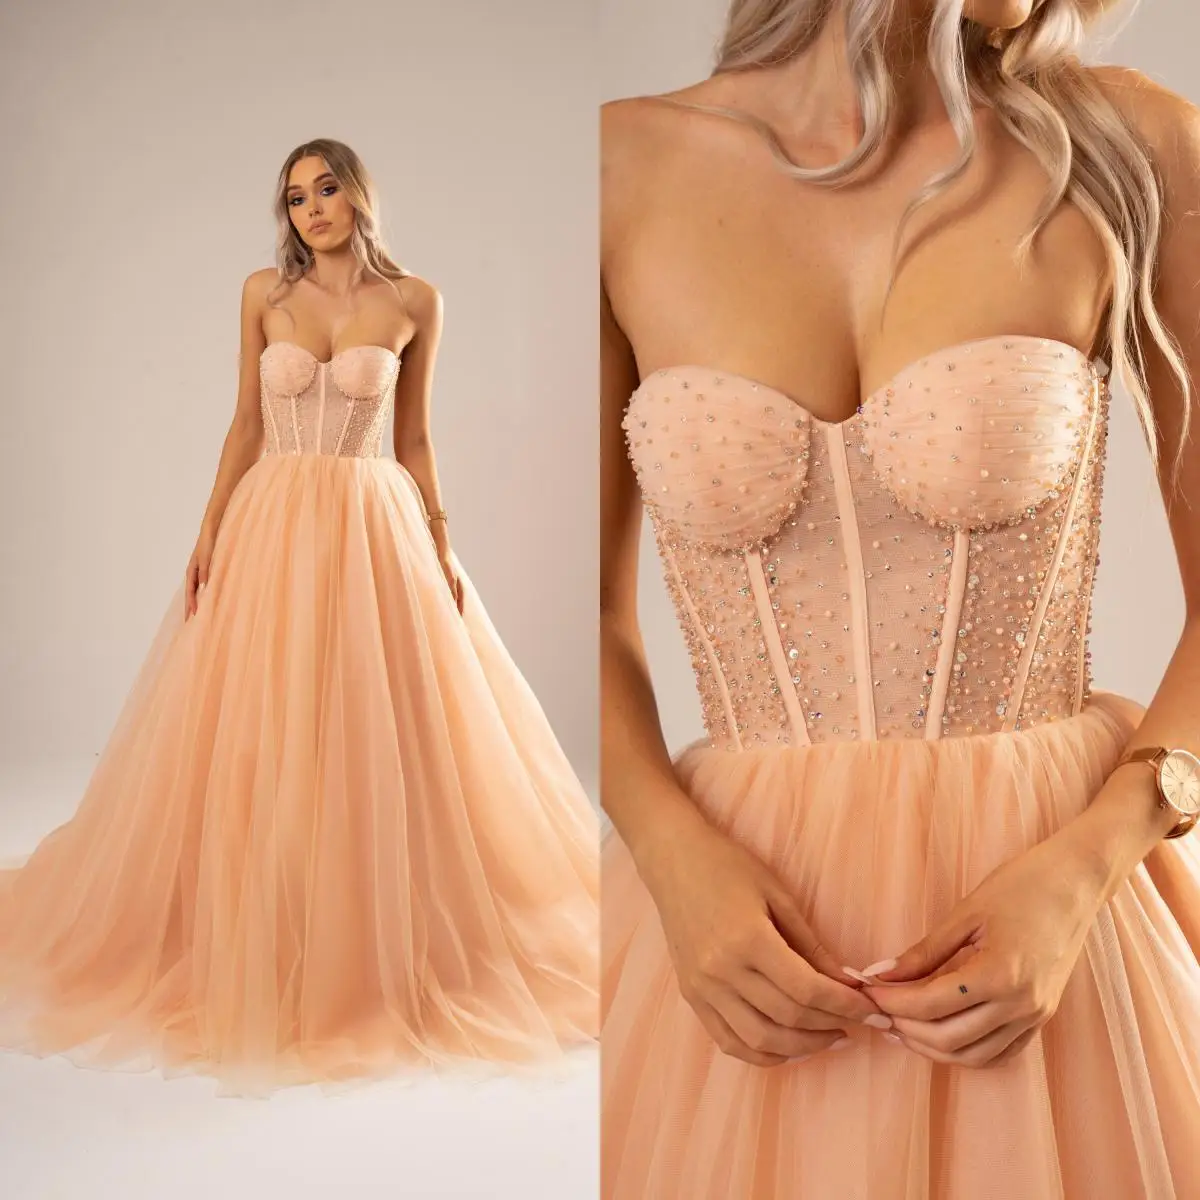 

14688#VAN Champagne High Quality Peach Nude Sparkling Assorted Beads Boning Corset Puffy Tull Lace Up Evening Dress Prom Gown